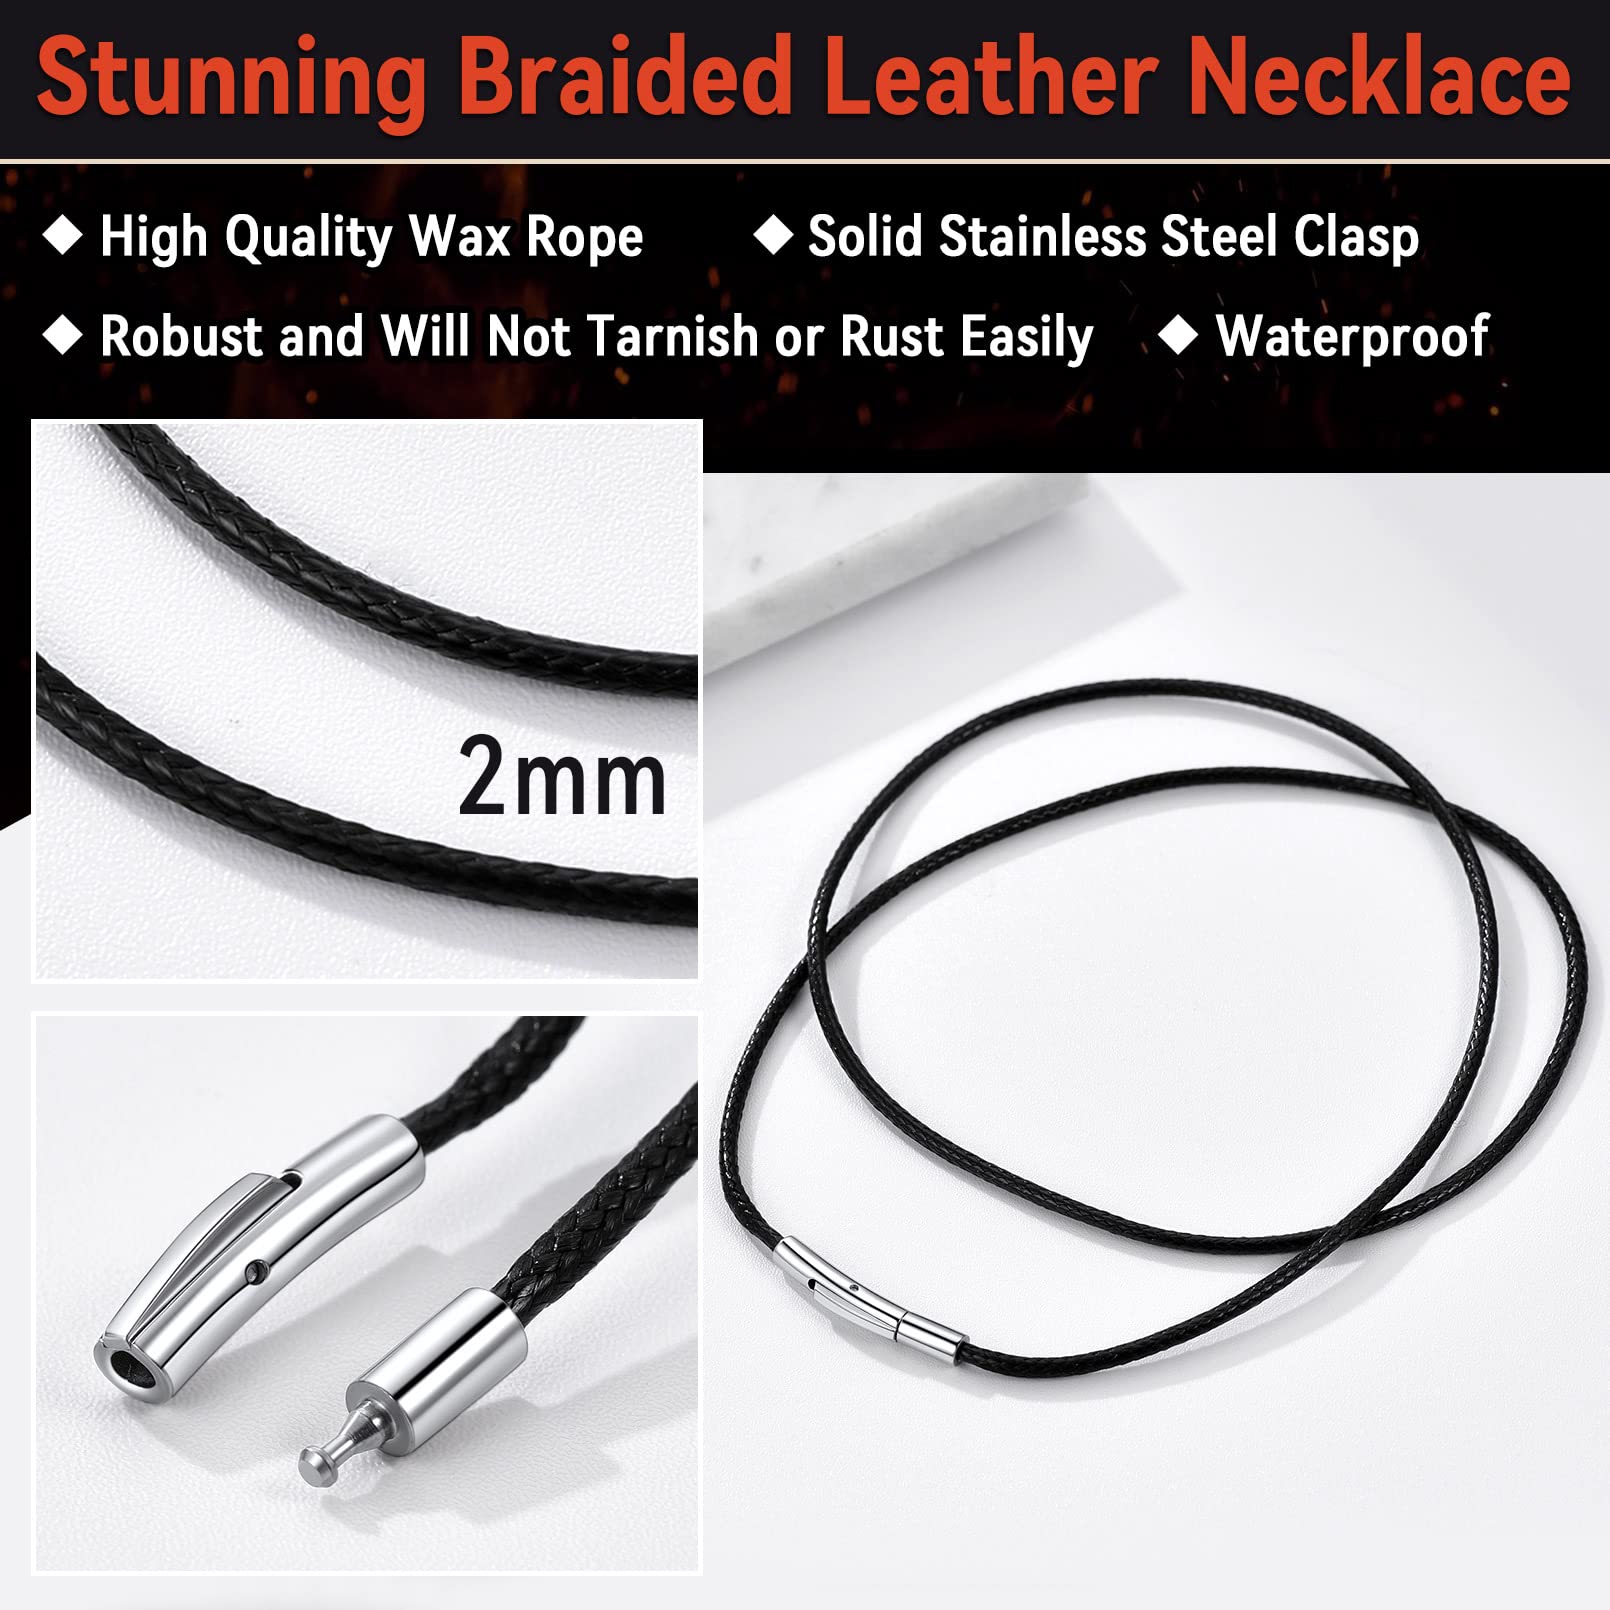 FaithHeart Braided Leather Cord 2MM/3MM Chain Necklace Stainless Steel Durable Snap Clasp, Men Women DIY Waterproof Woven Wax Rope Chain for Pendant (Gift Packaging)